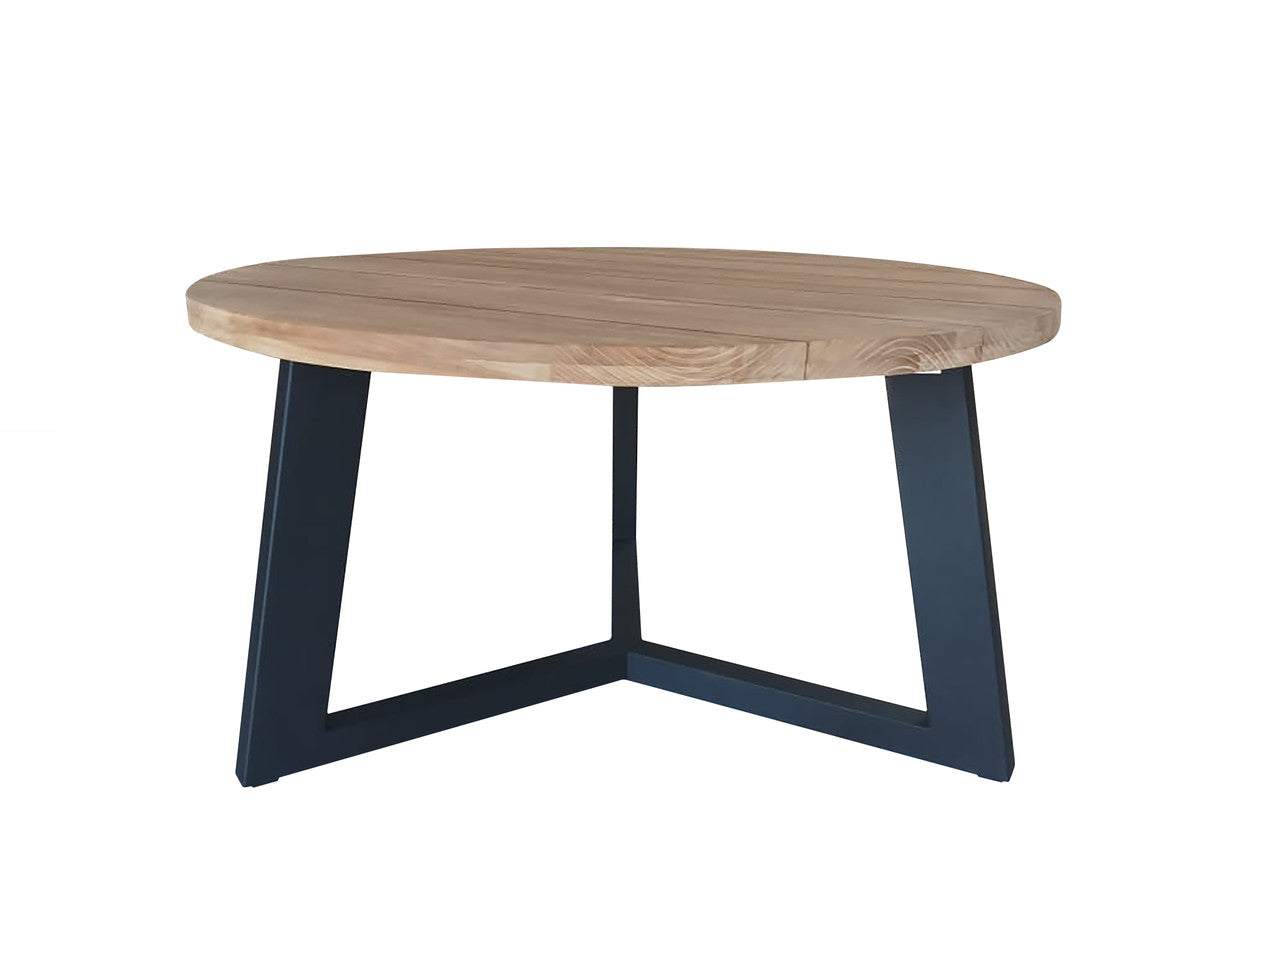 CO9 Design - Brewer Round Dining Table with Solid Teak Top with an Aluminum Base in Lava | [BW63]